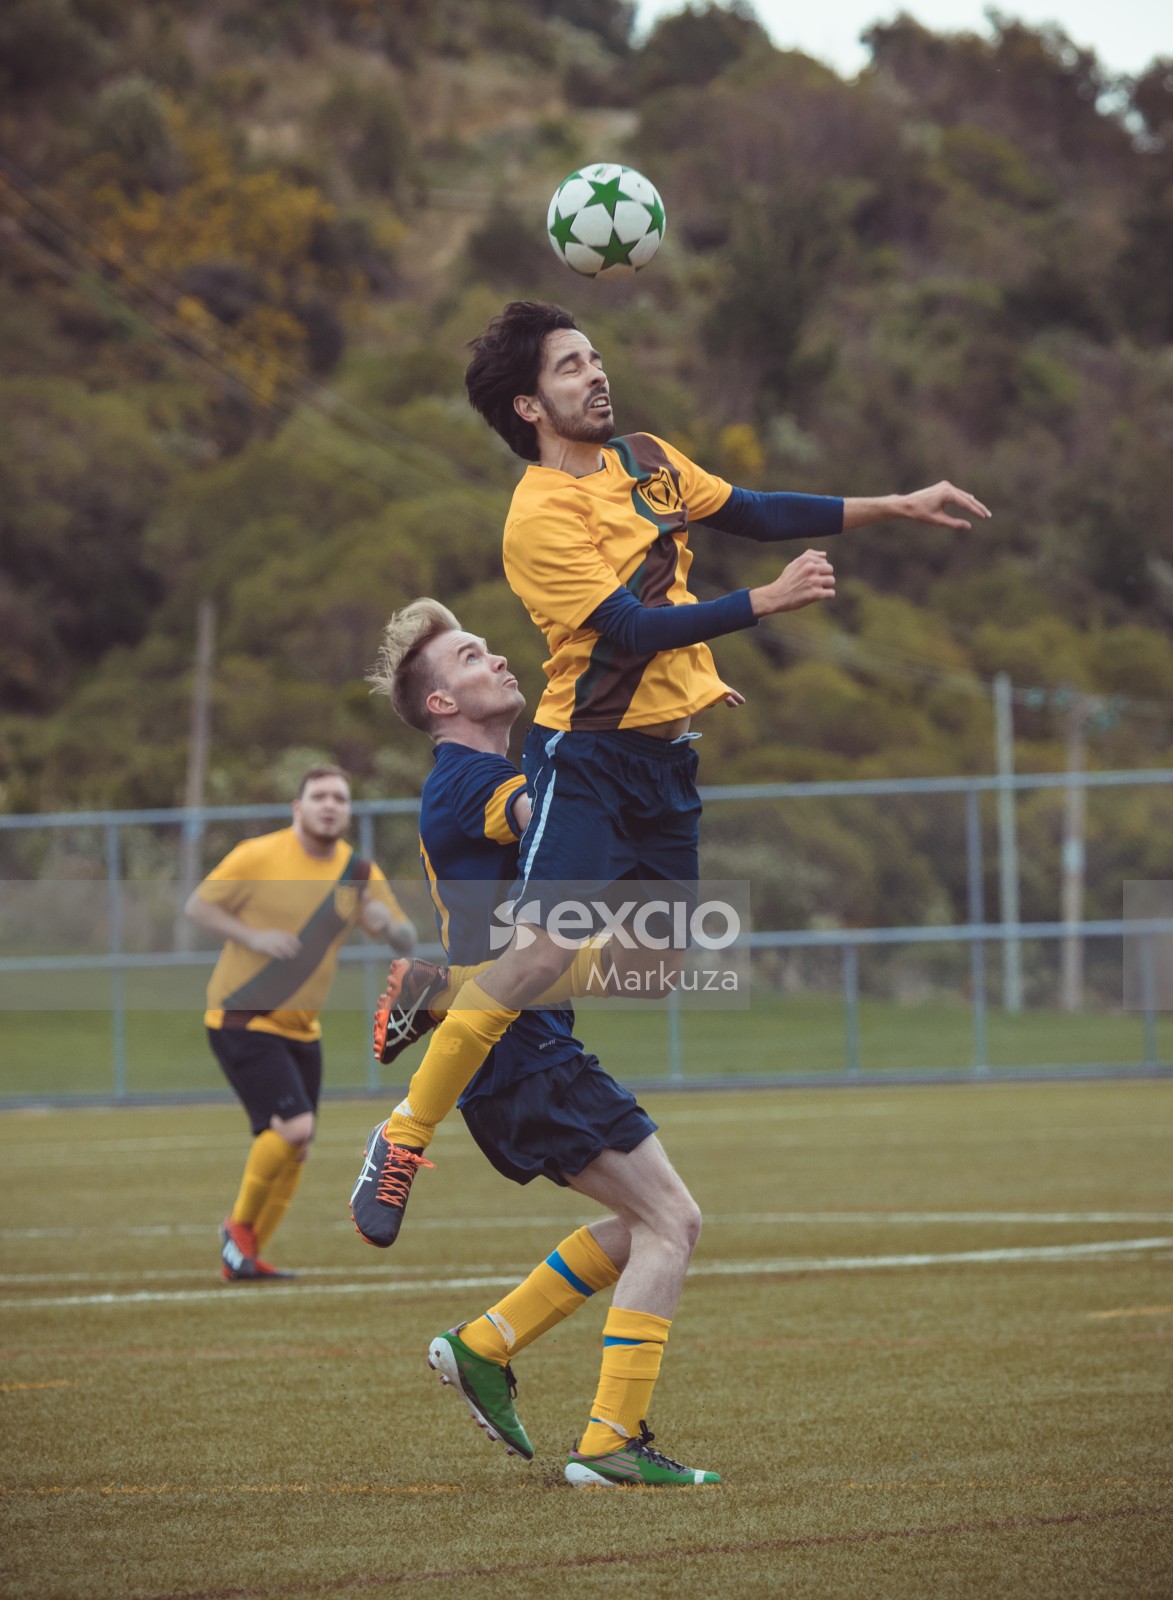 Player using his head midair to control the ball - Sports Zone sunday league